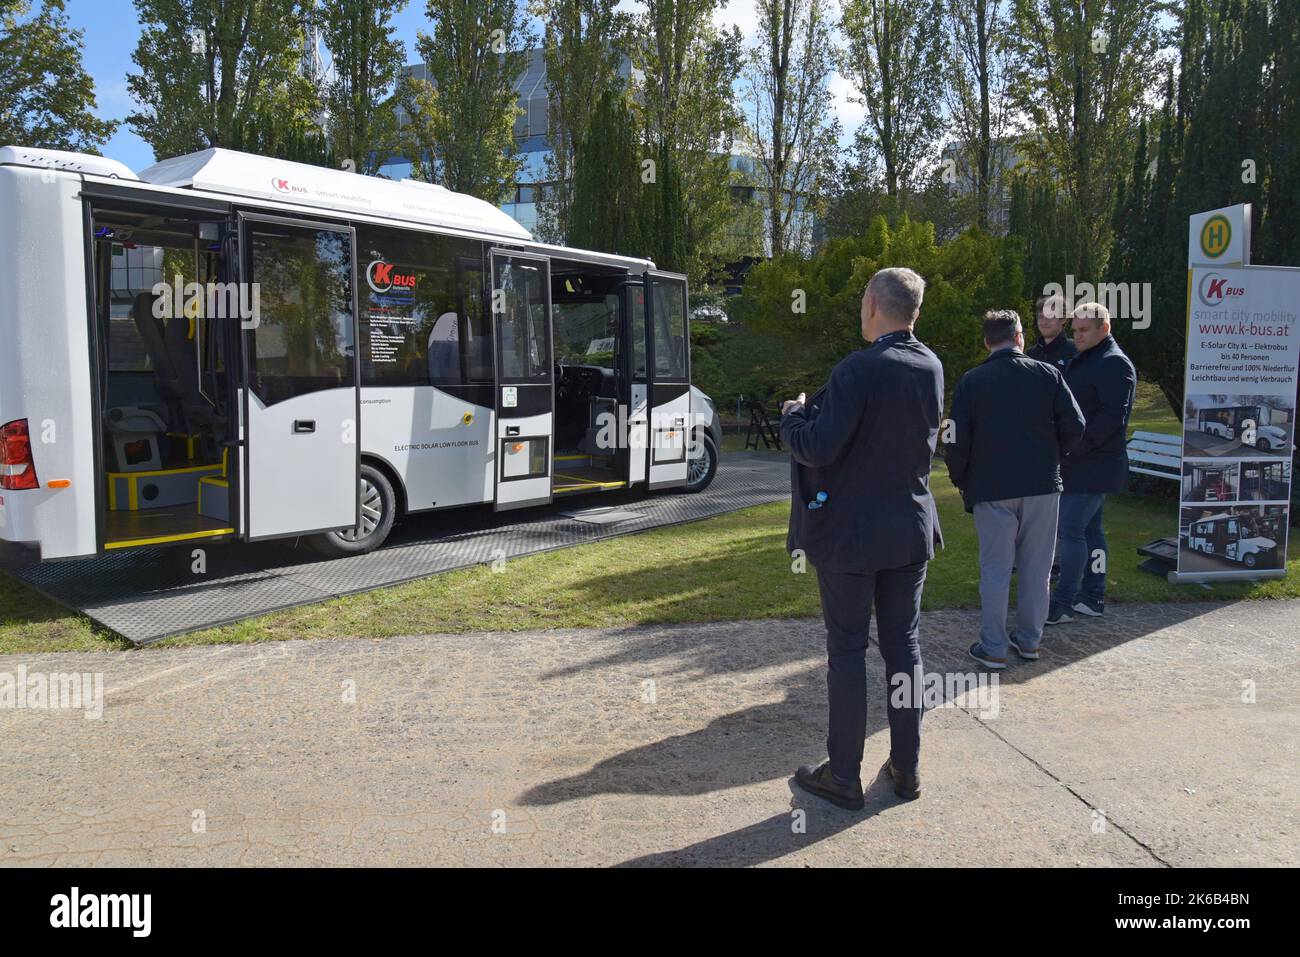 People studying the K Bus low floor emission free electric bus with solar panels at Innotrans international transport expo, Berlin Sept 2022 Stock Photo